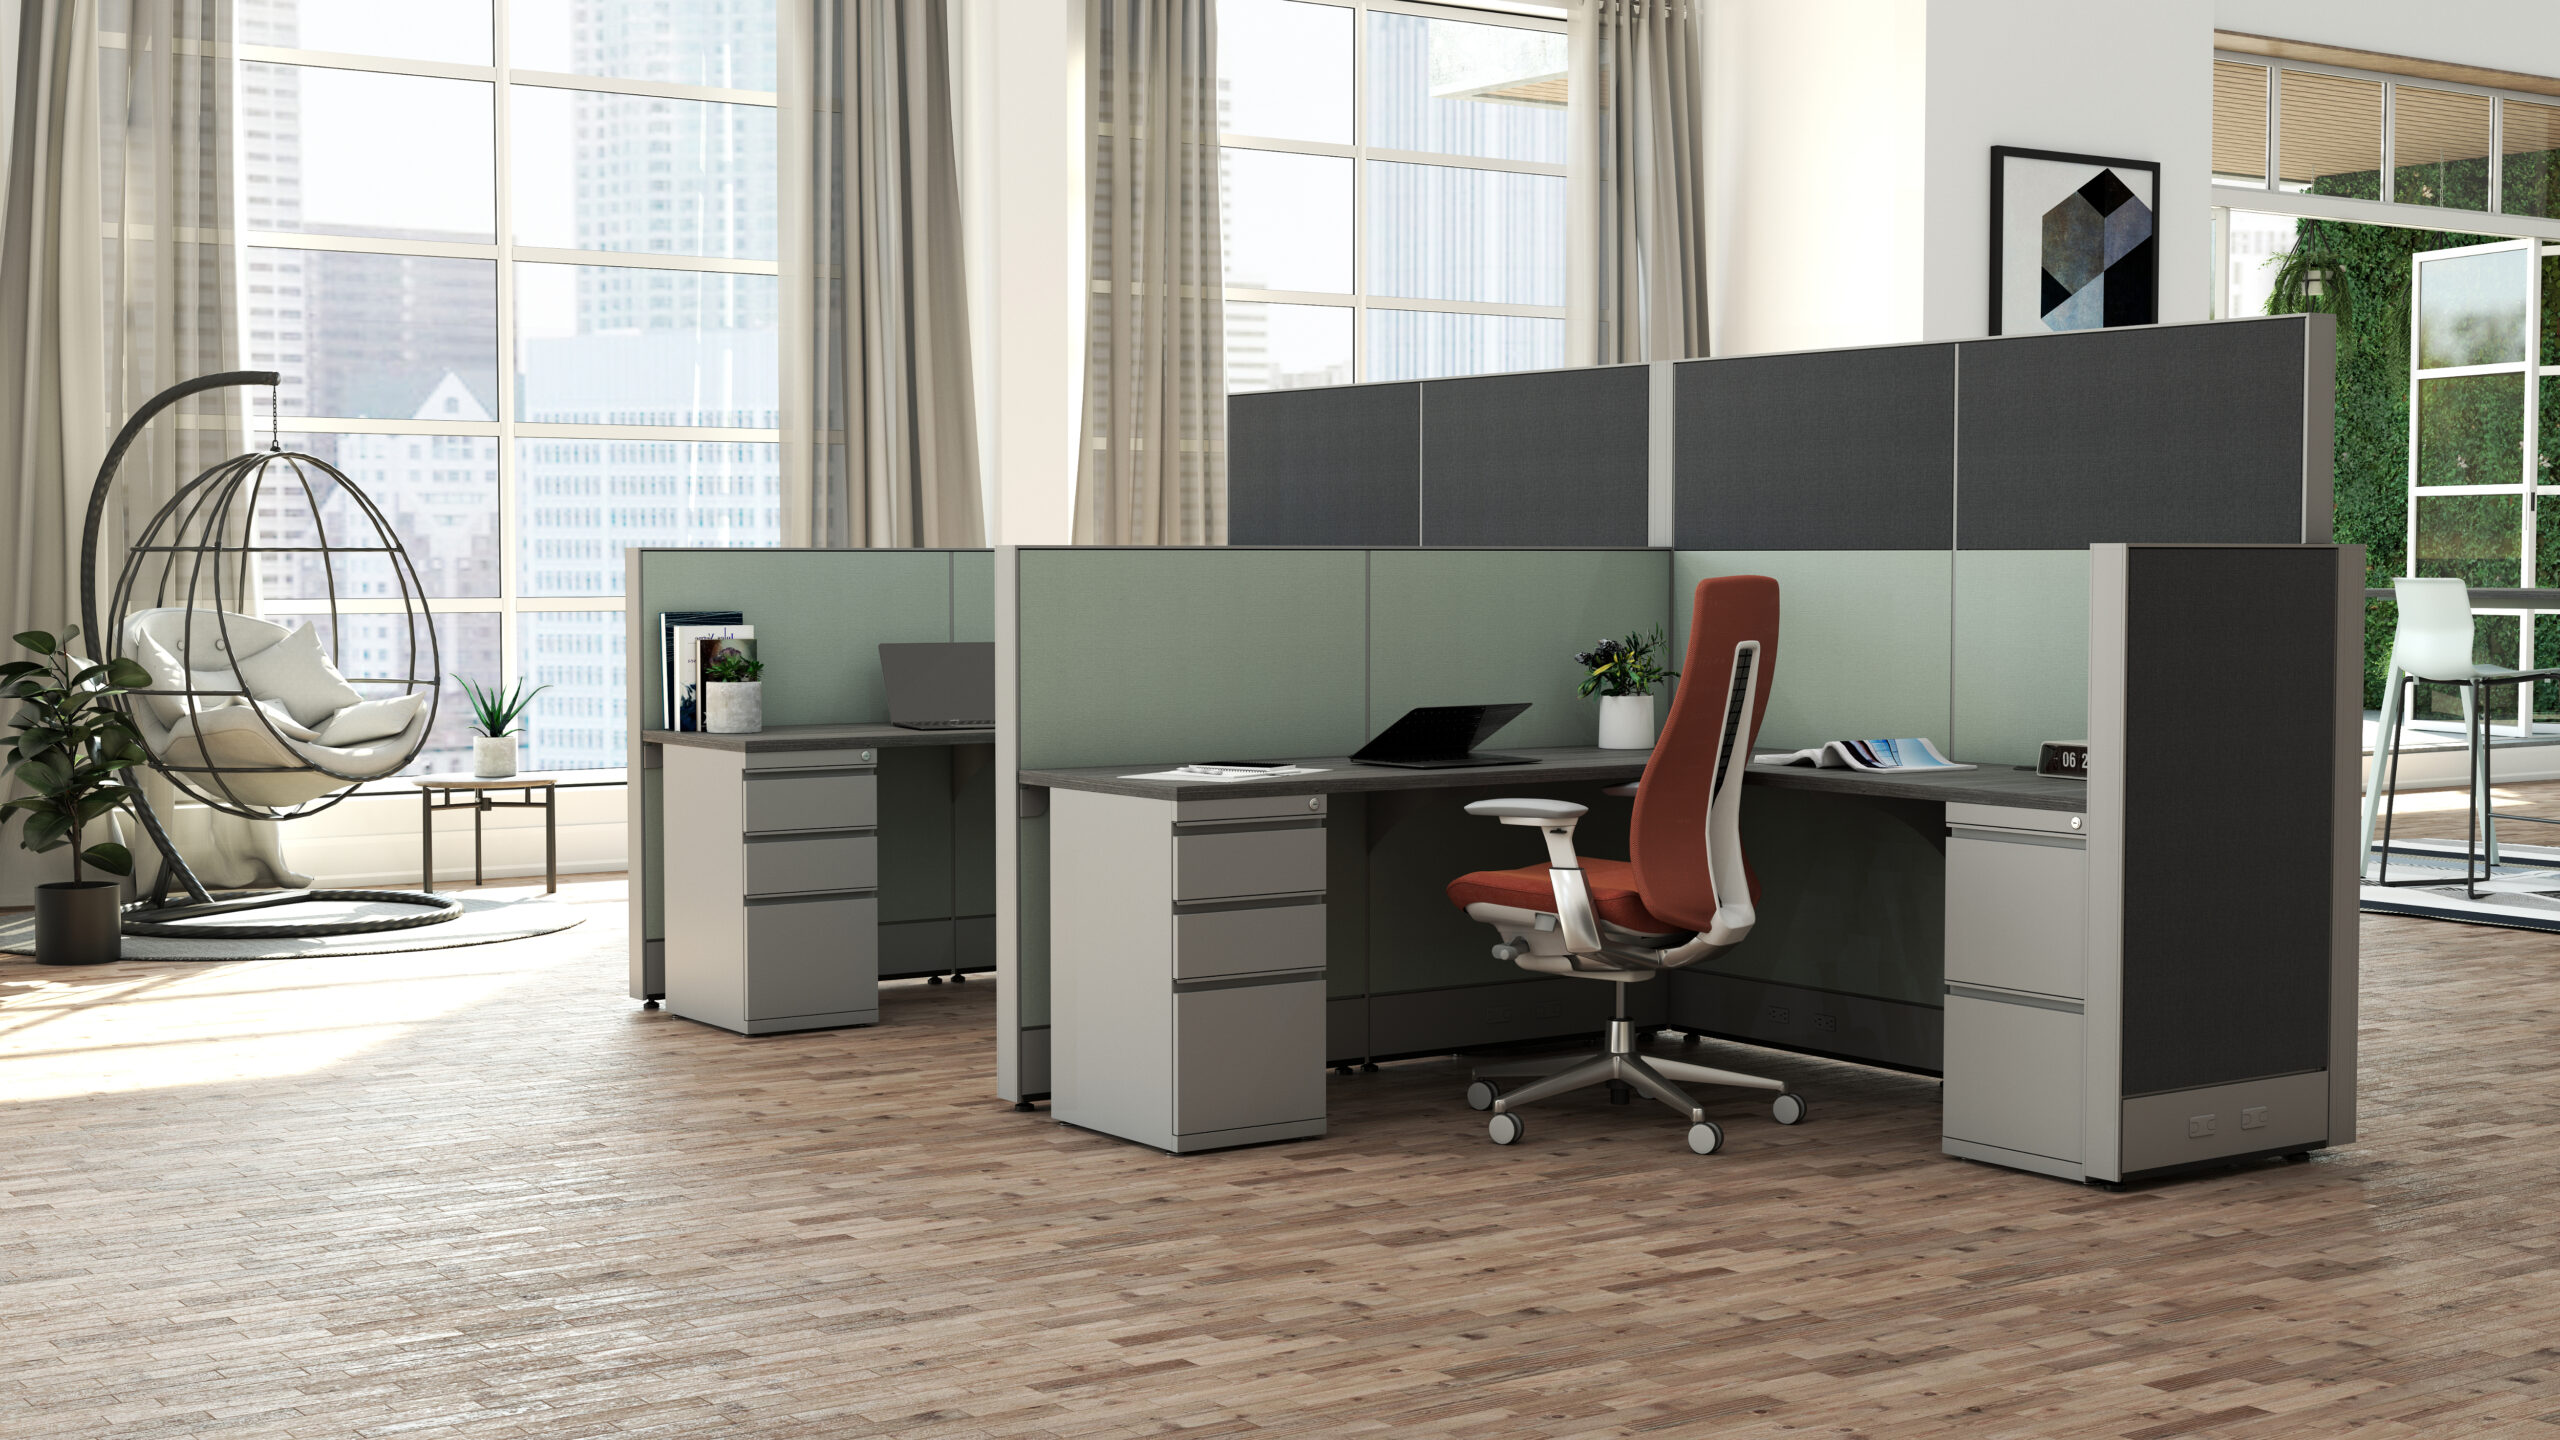 workplace social distancing with cubicles